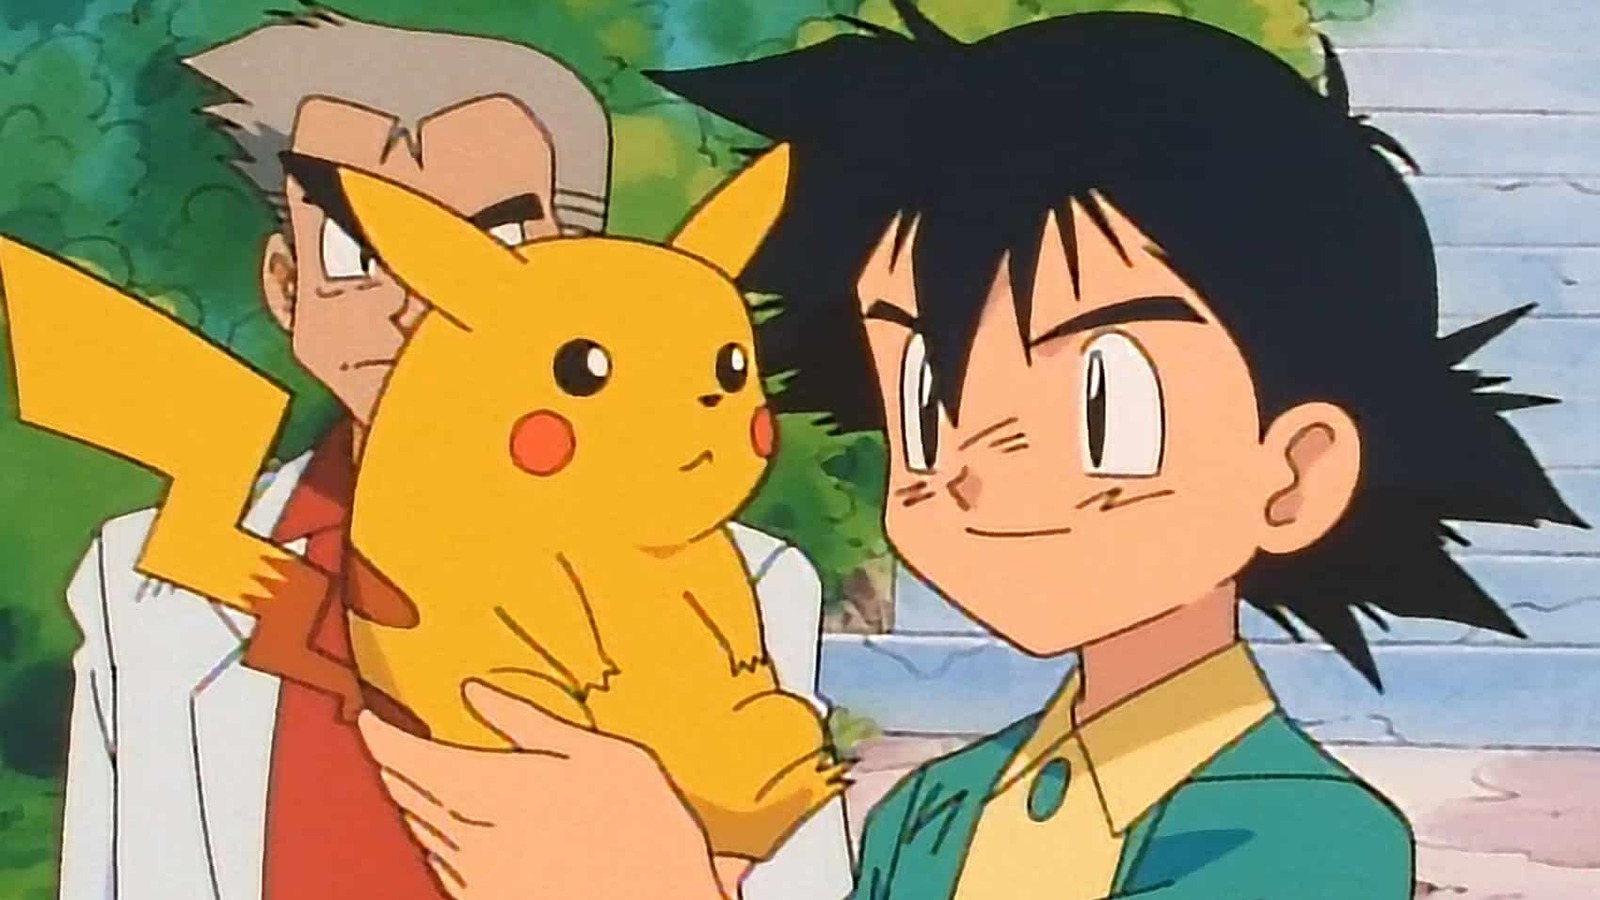 Pokémon Is Concluding The Journey Of Ash And Pikachu, New Series With